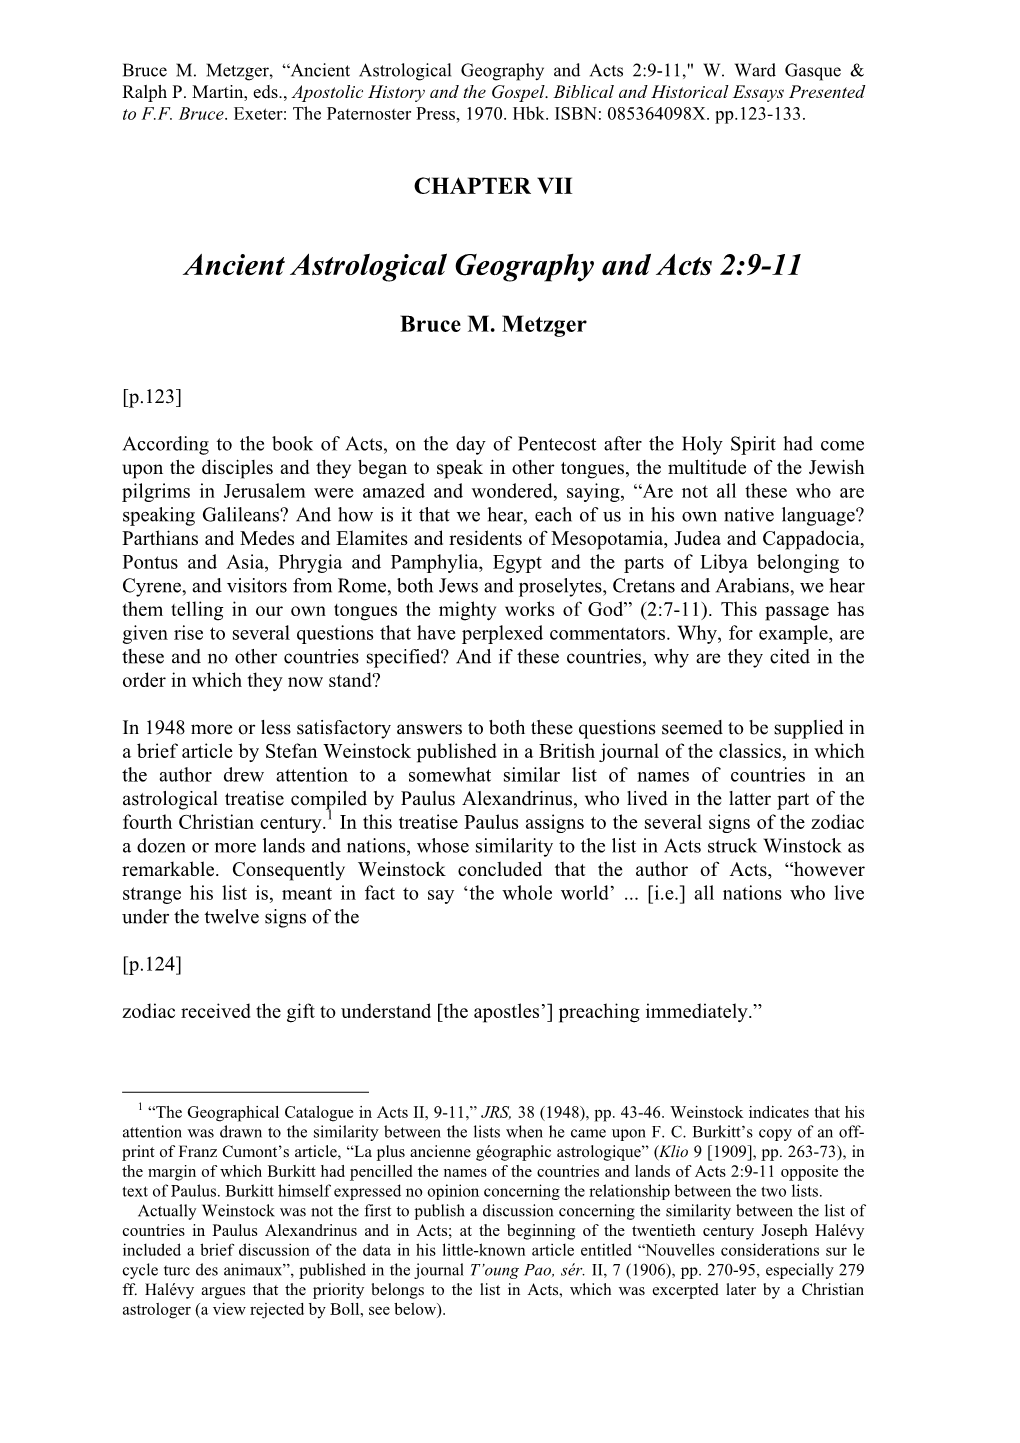 Ancient Astrological Geography and Acts 2:9-11," W